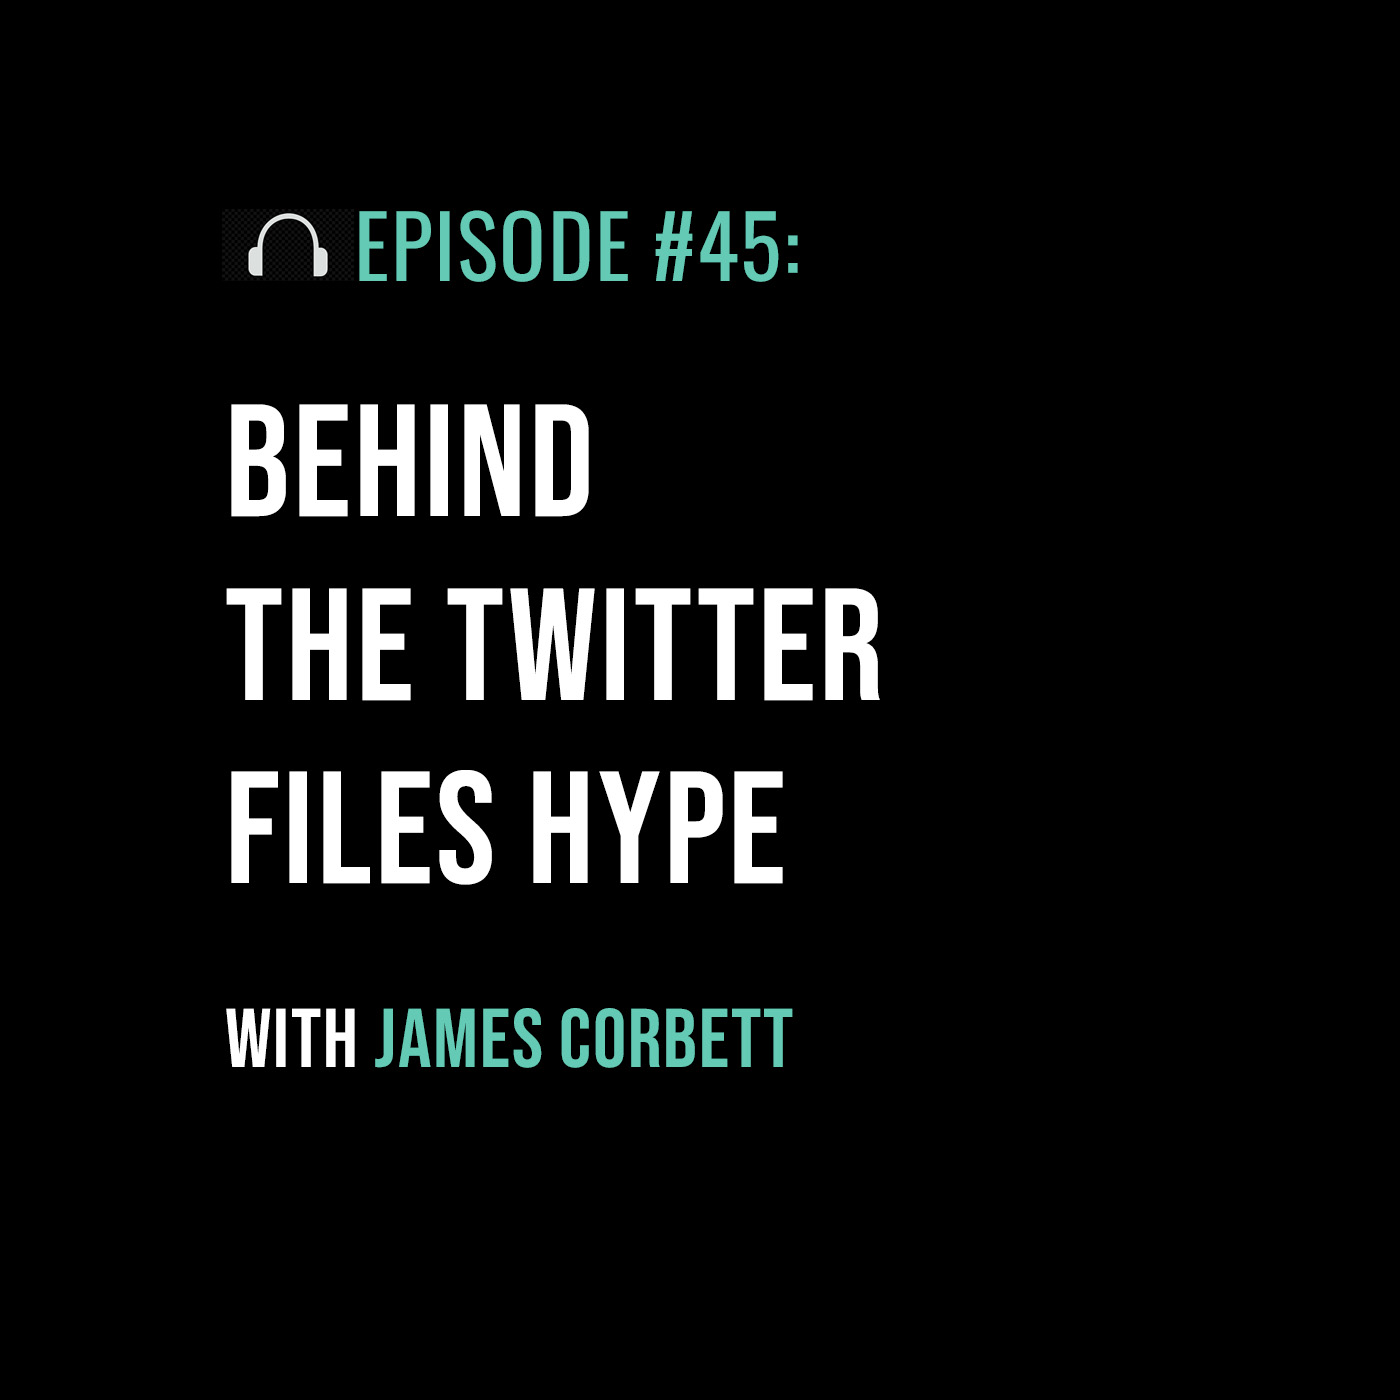 Behind the Twitter Files Hype with James Corbett